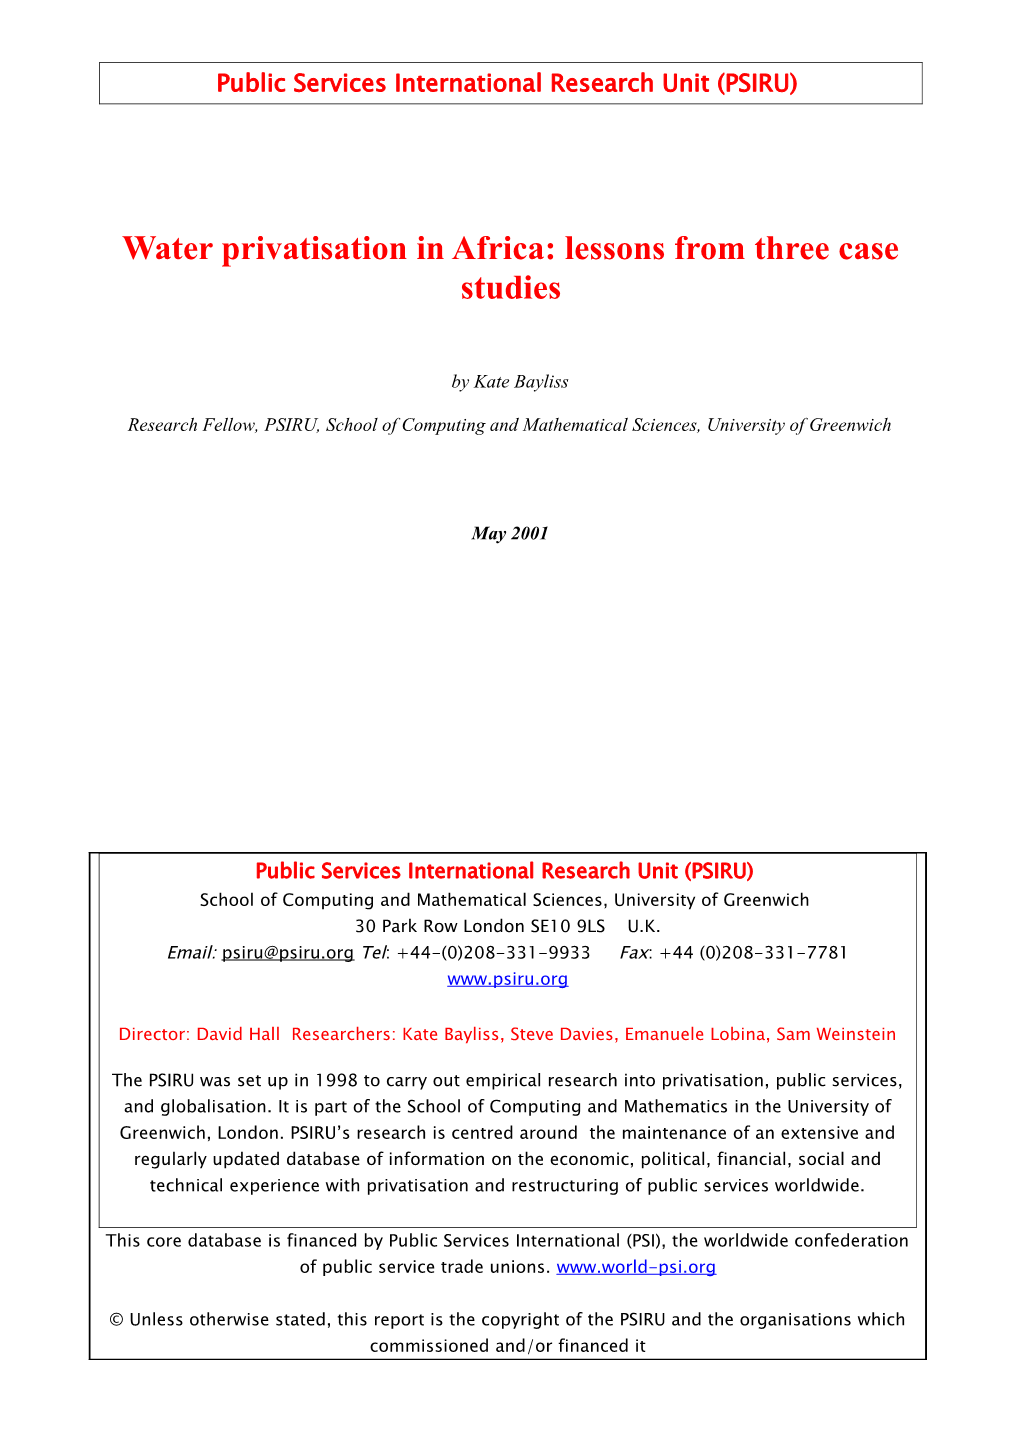 Water Privatisation in Africa: Lessons from Three Case Studies